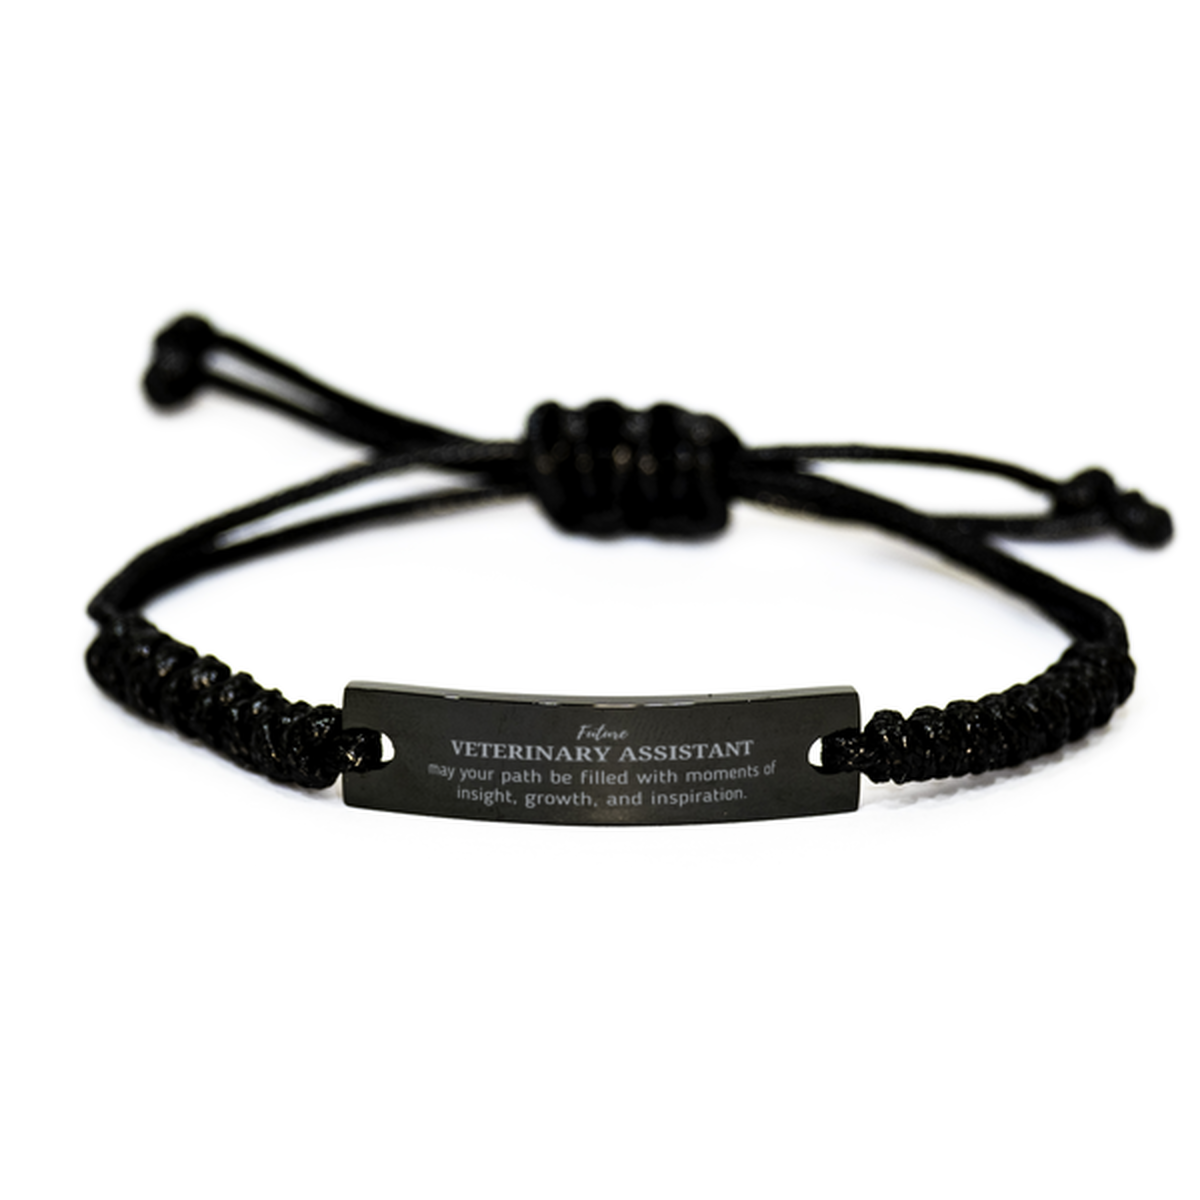 Future Veterinary Assistant Gifts, May your path be filled with moments of insight, Graduation Gifts for New Veterinary Assistant, Christmas Unique Black Rope Bracelet For Men, Women, Friends